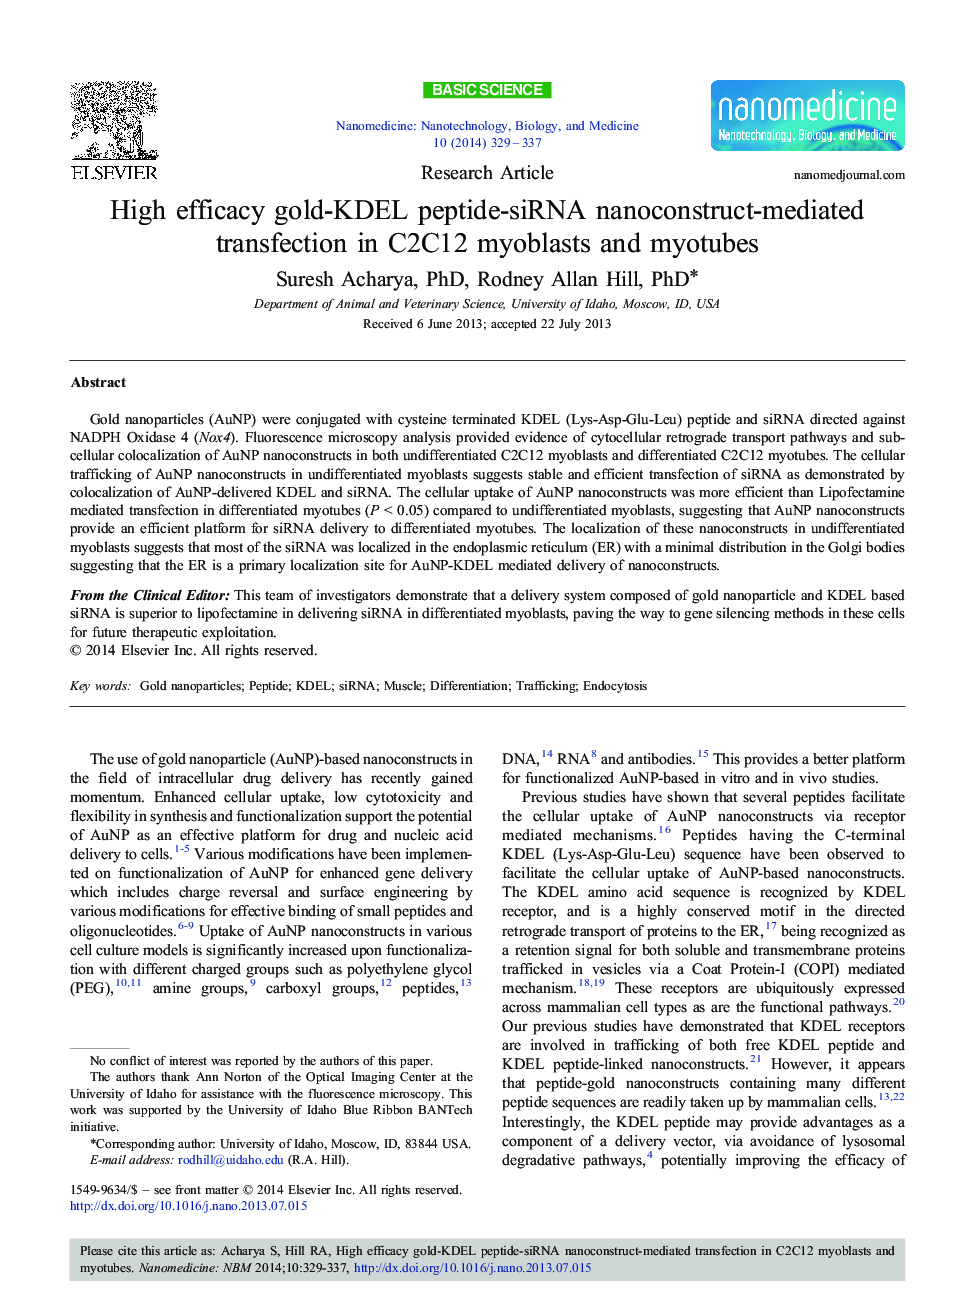 High efficacy gold-KDEL peptide-siRNA nanoconstruct-mediated transfection in C2C12 myoblasts and myotubes